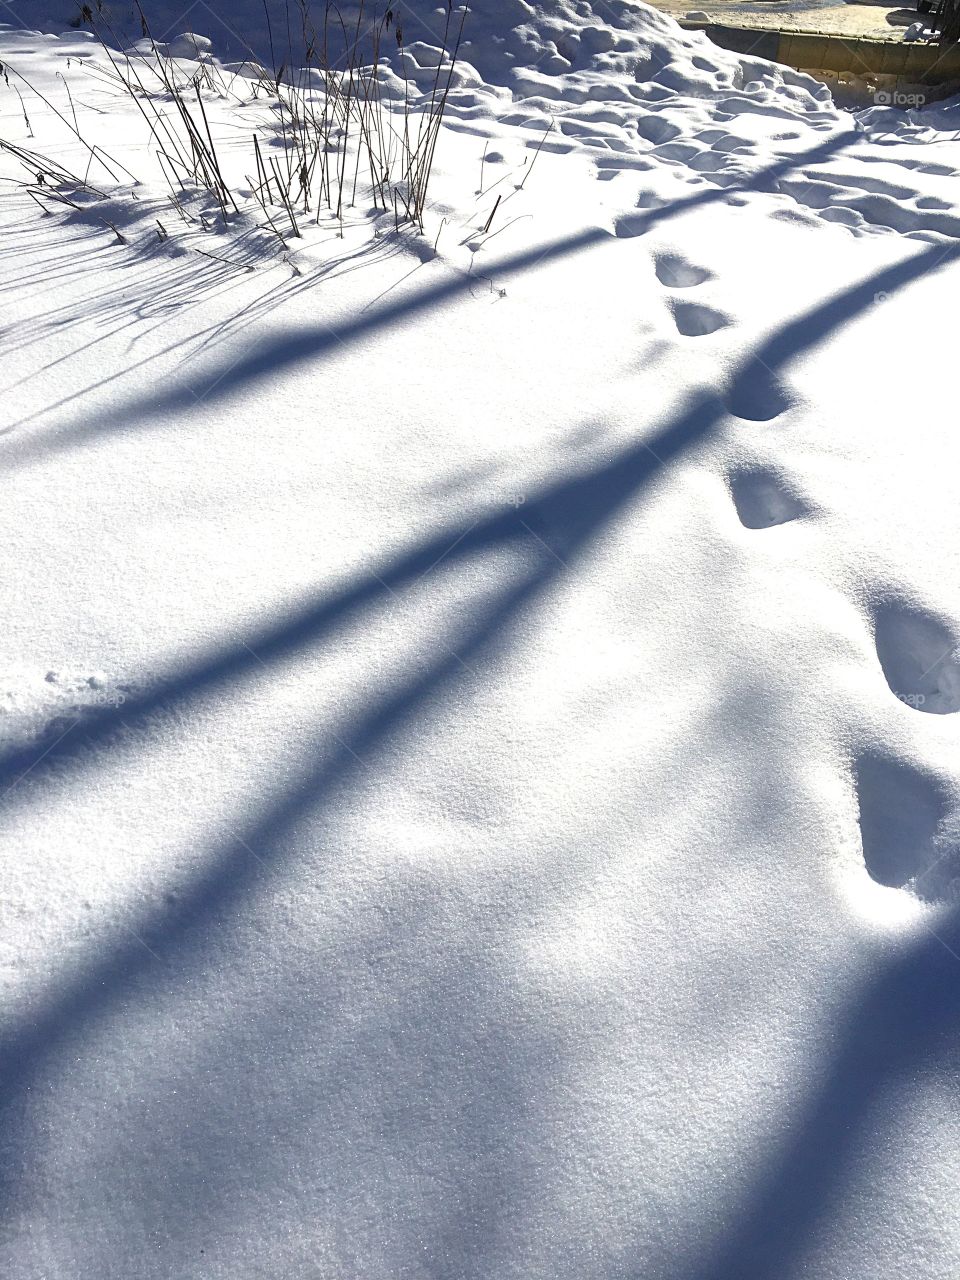 Shadows and footprints in the snow